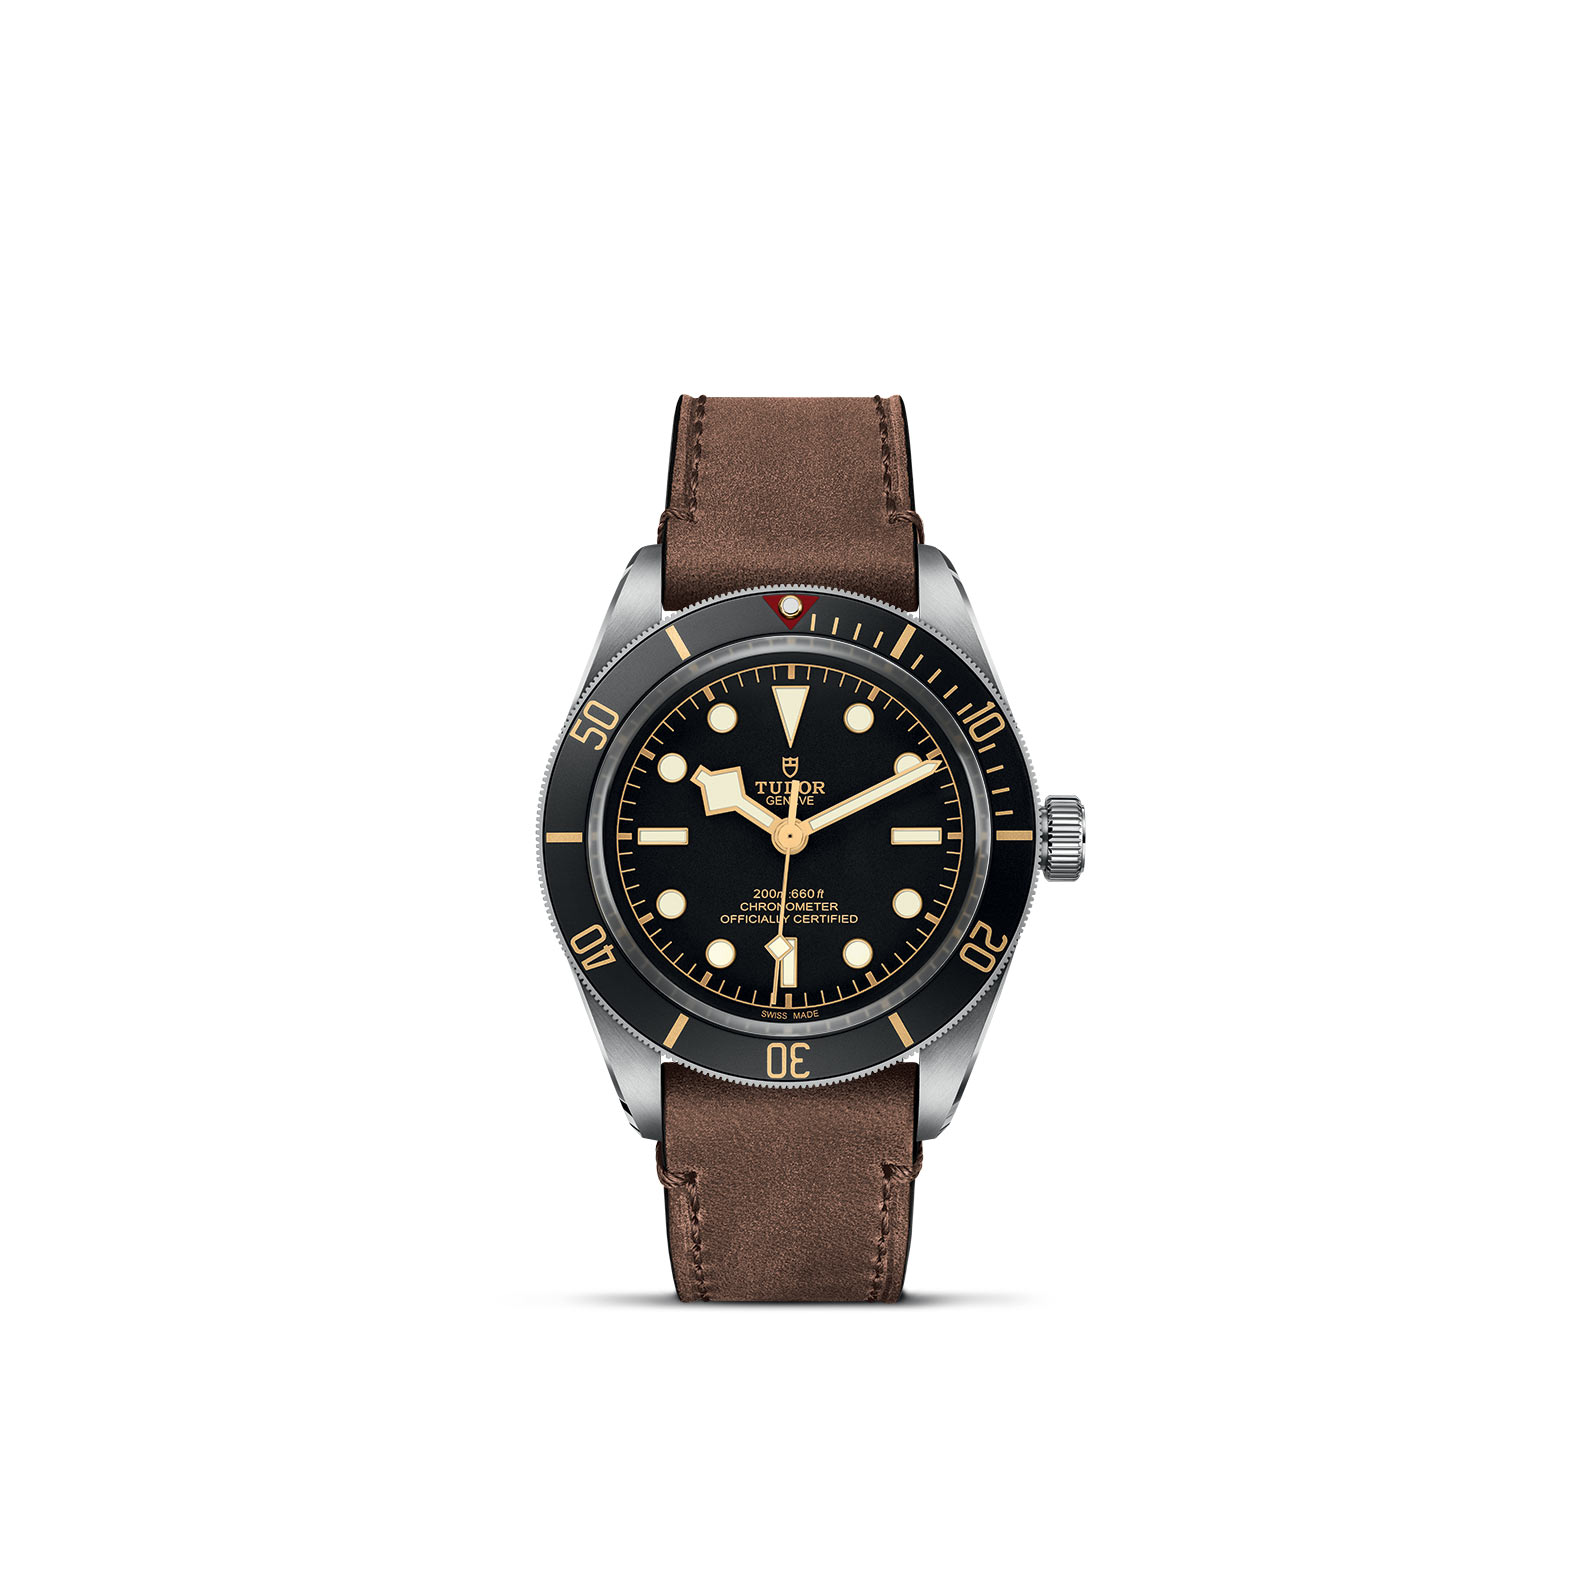 TUDOR BLACK BAY 58 standing upright, highlighting its classic design against a white background.